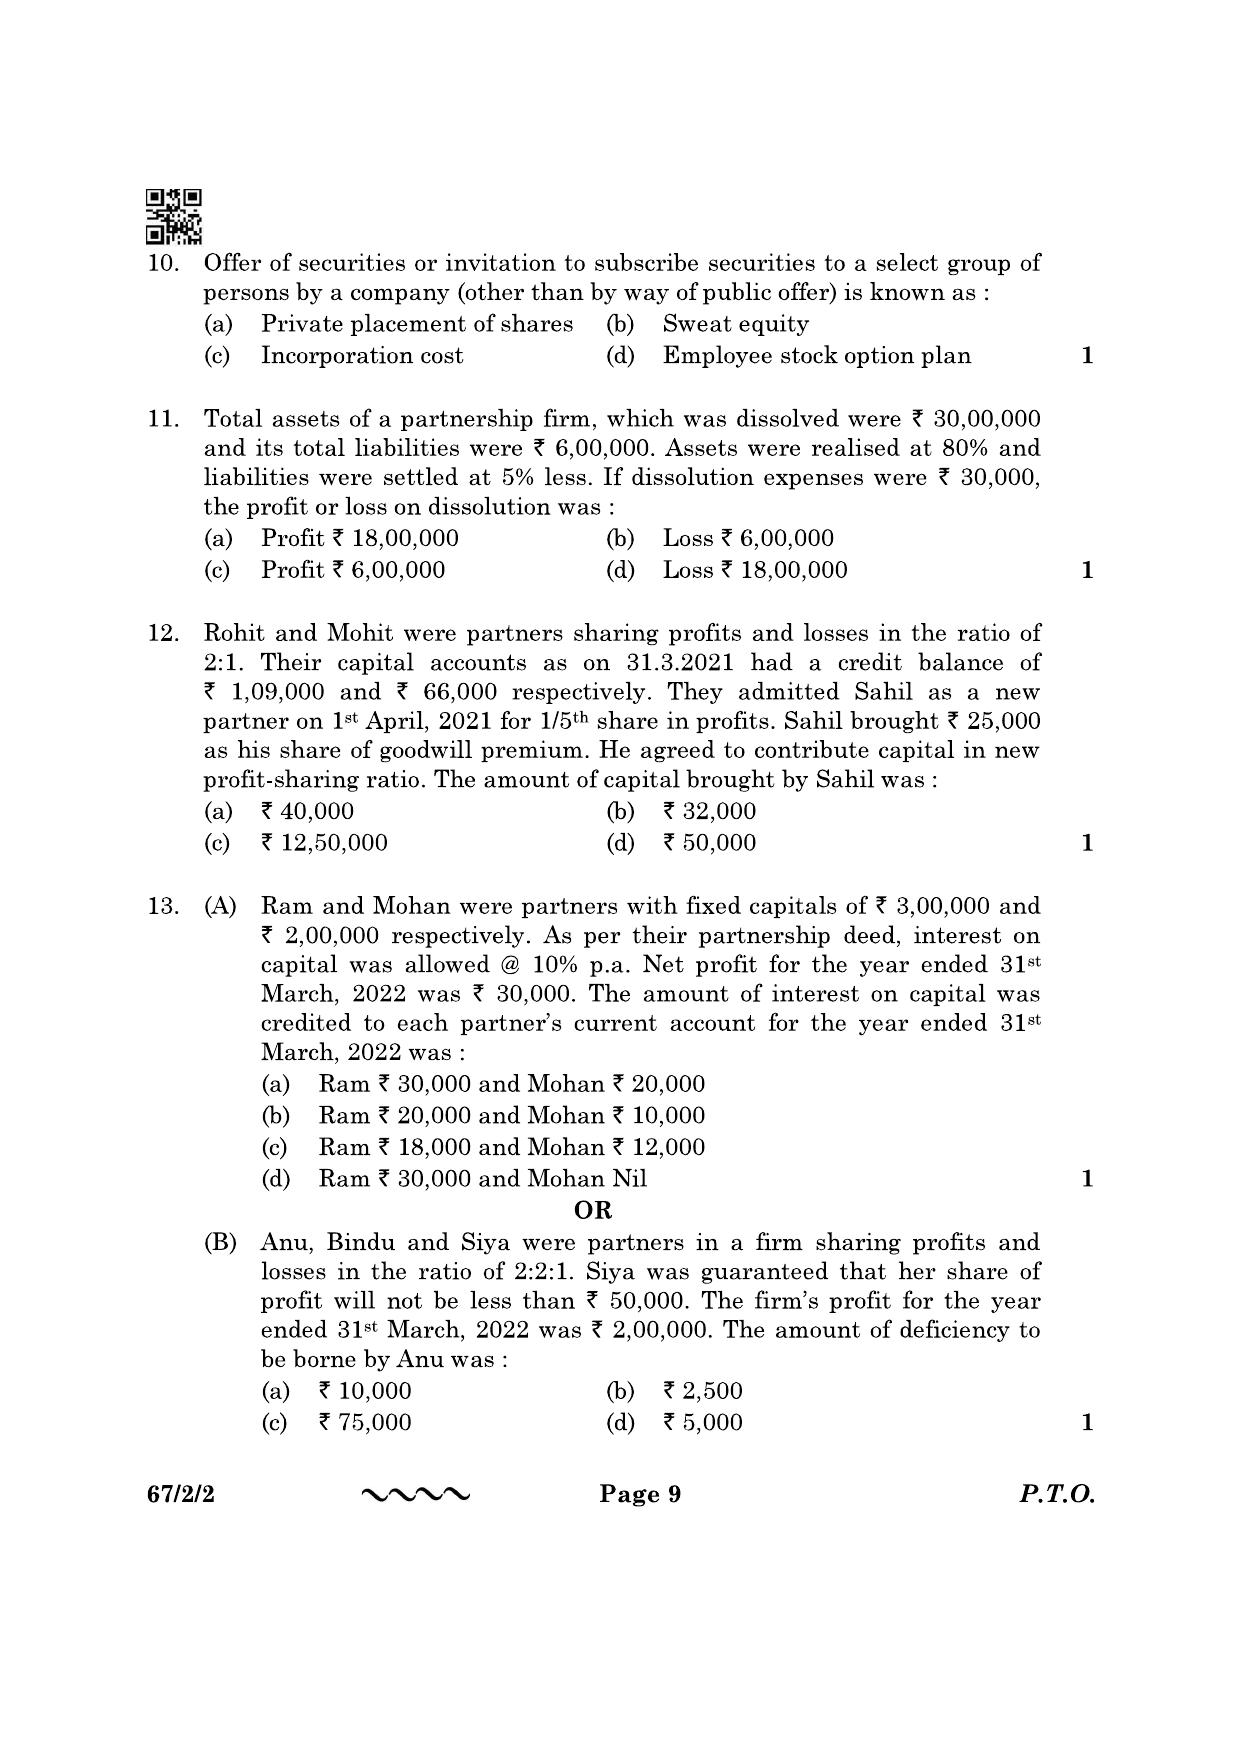 CBSE Class 12 67-2-2 Accountancy 2023 Question Paper - Page 9